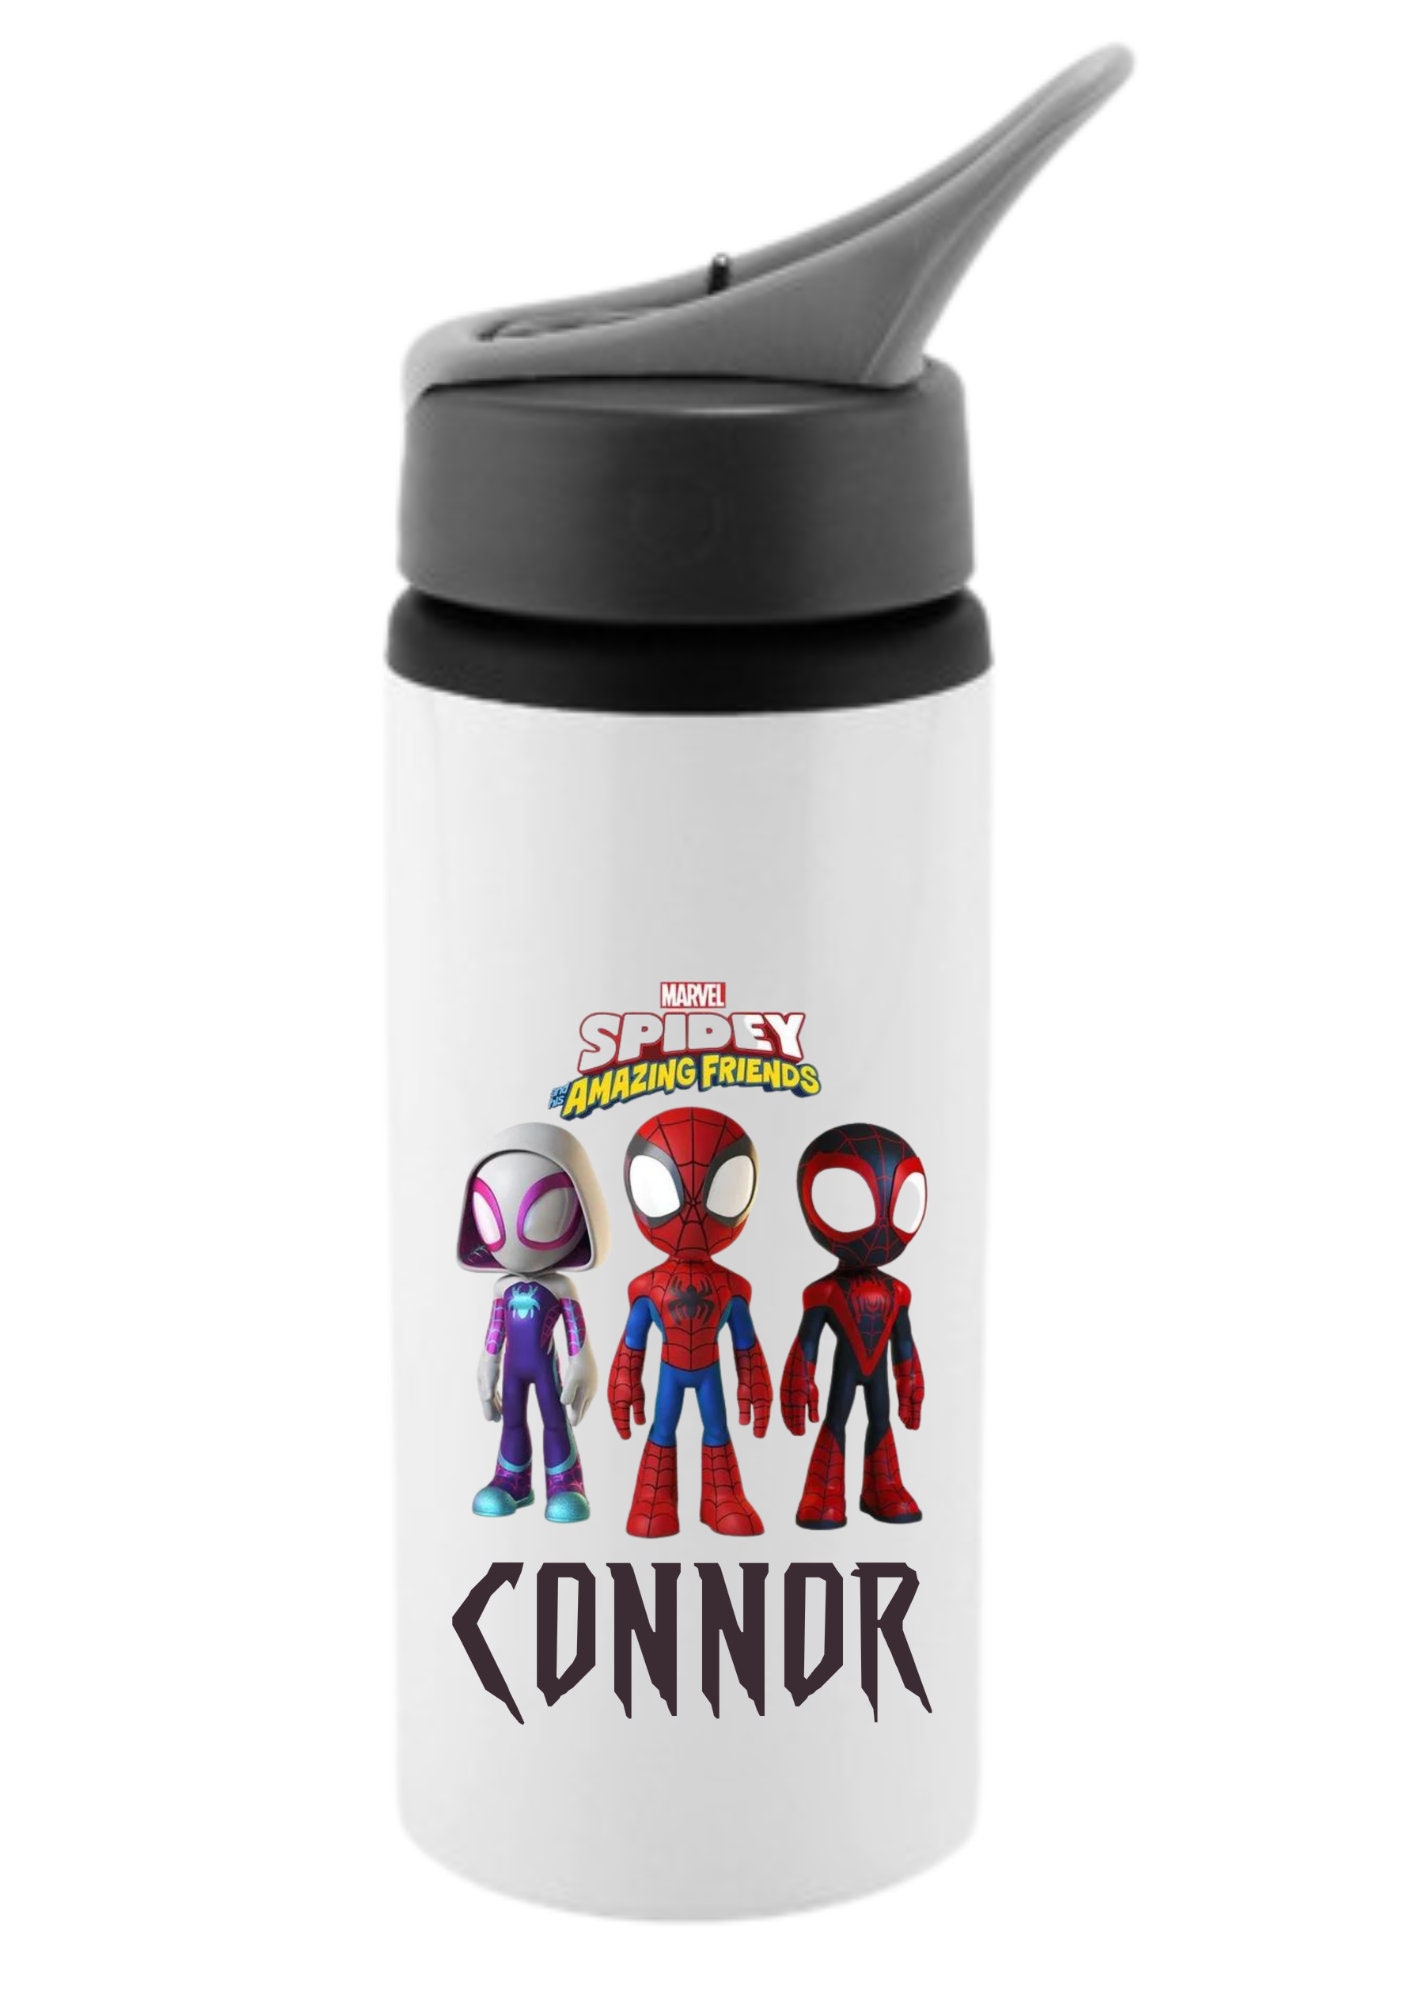 Spider-Man 20 Ounce Water Bottle with Decorative Sticker Sheet